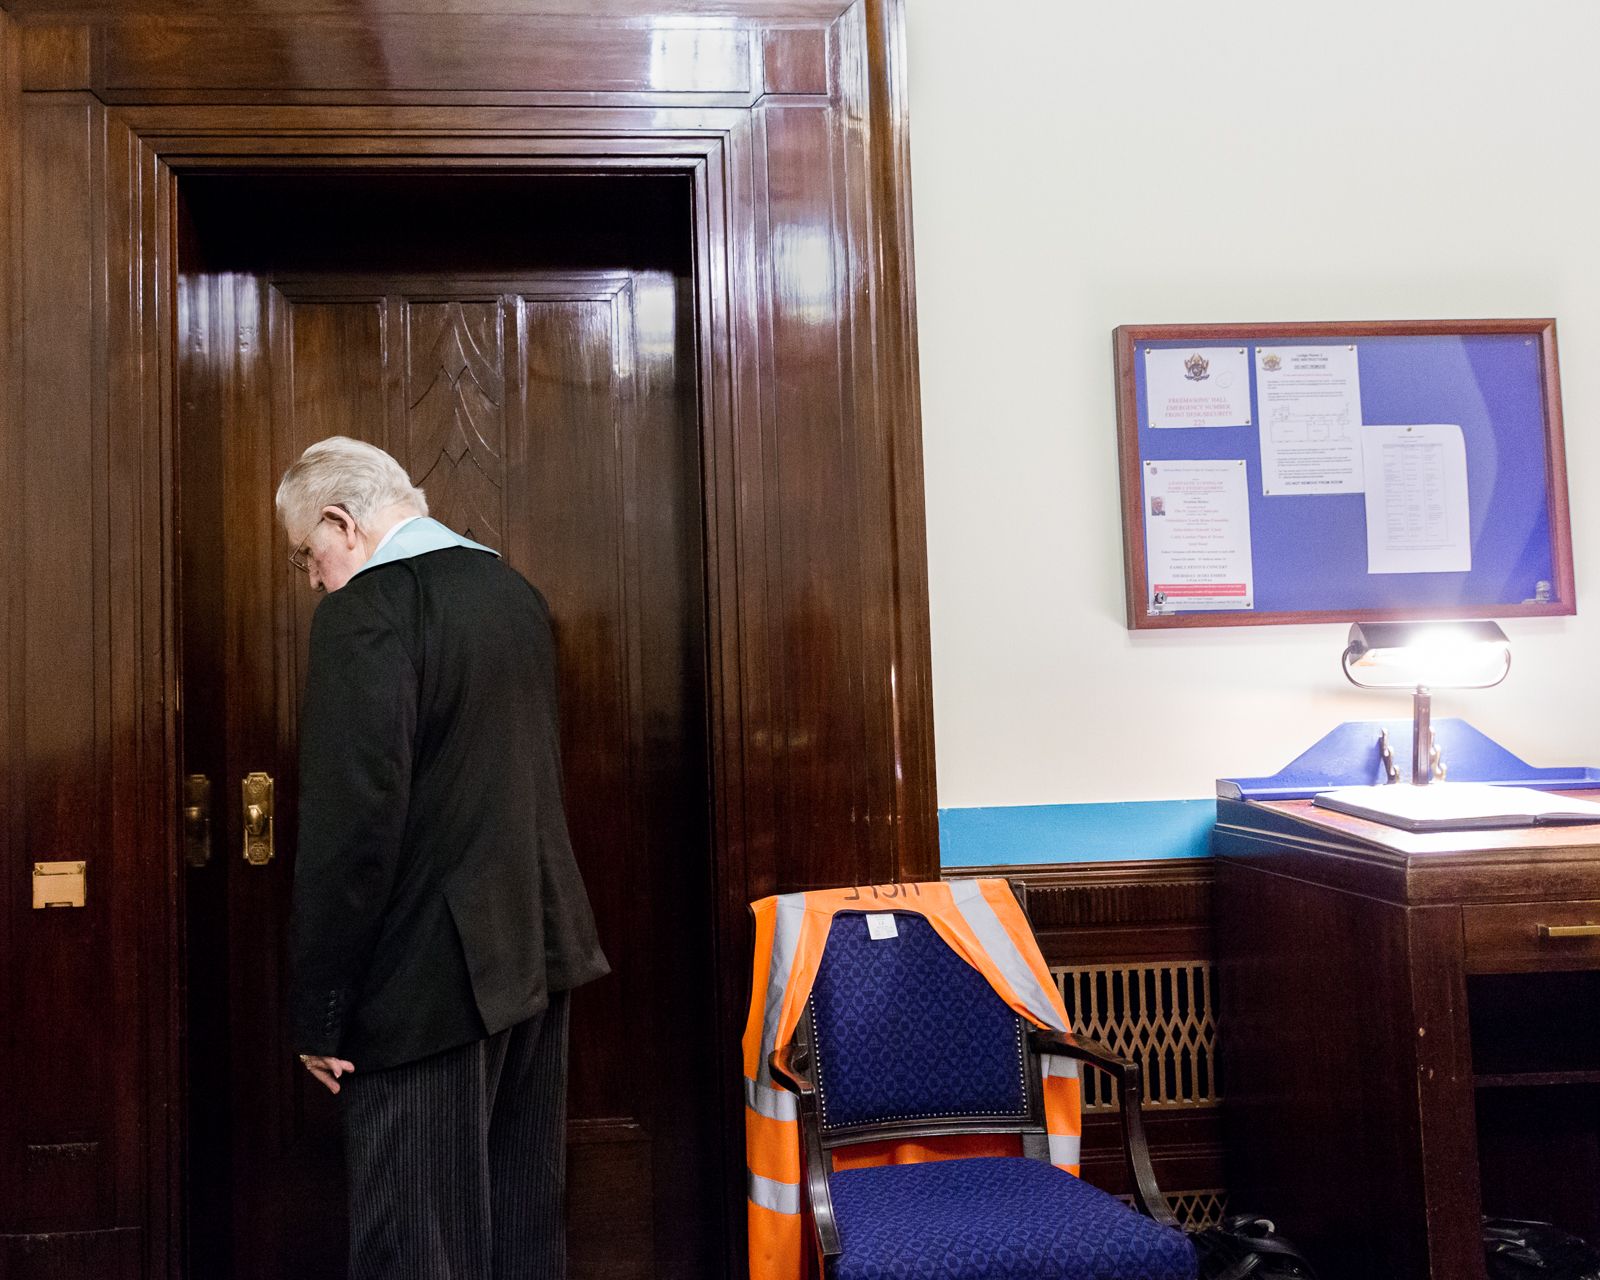 © Juliane Herrmann - Tyler at ‘Freemasons’ Hall’, London, England, 2015. The Tyler has to guard the door during a meeting from the outside.